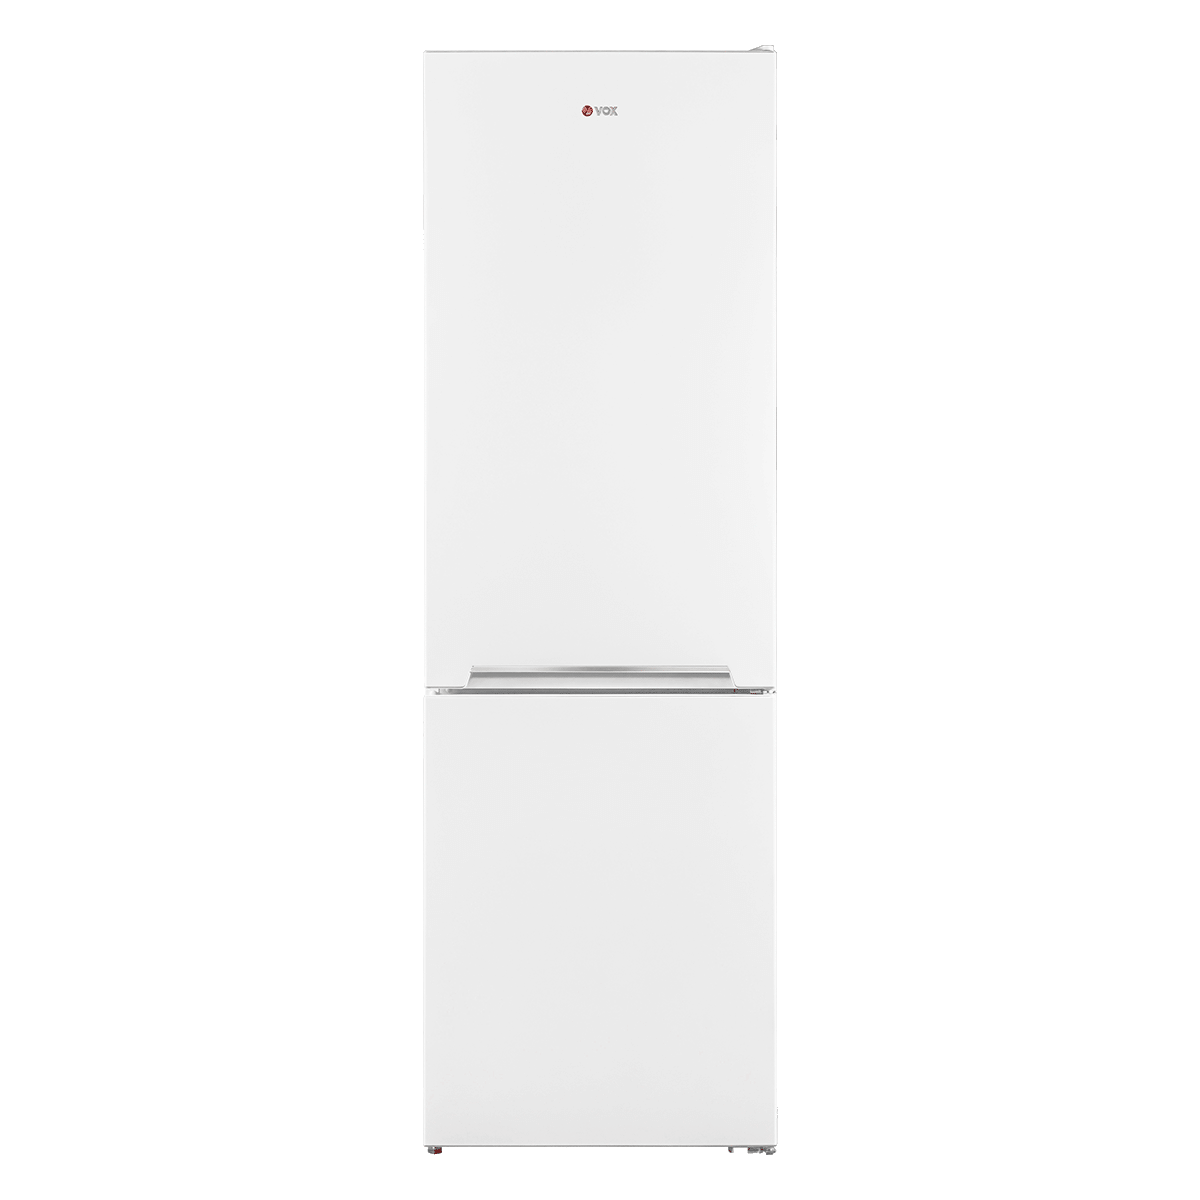 Combined refrigerator NF 3730 WE 